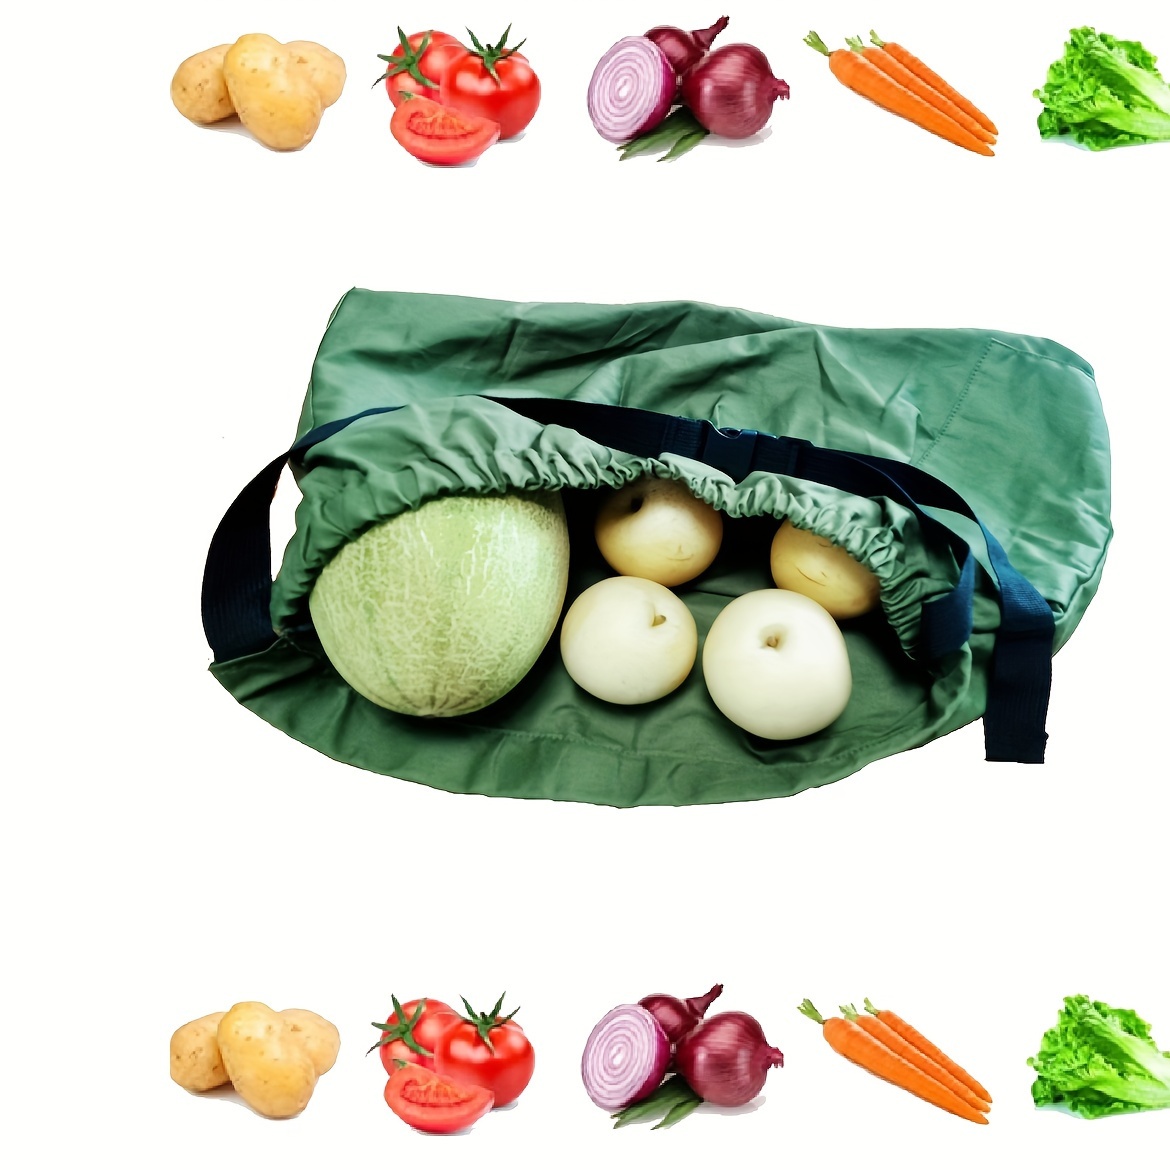 

1 Pack, Cutting Apron, Garden Harvest Apron, Perfect For Weeding Vegetables Fruit Picking, Collecting Eggs Herbs Plants, For Women Men